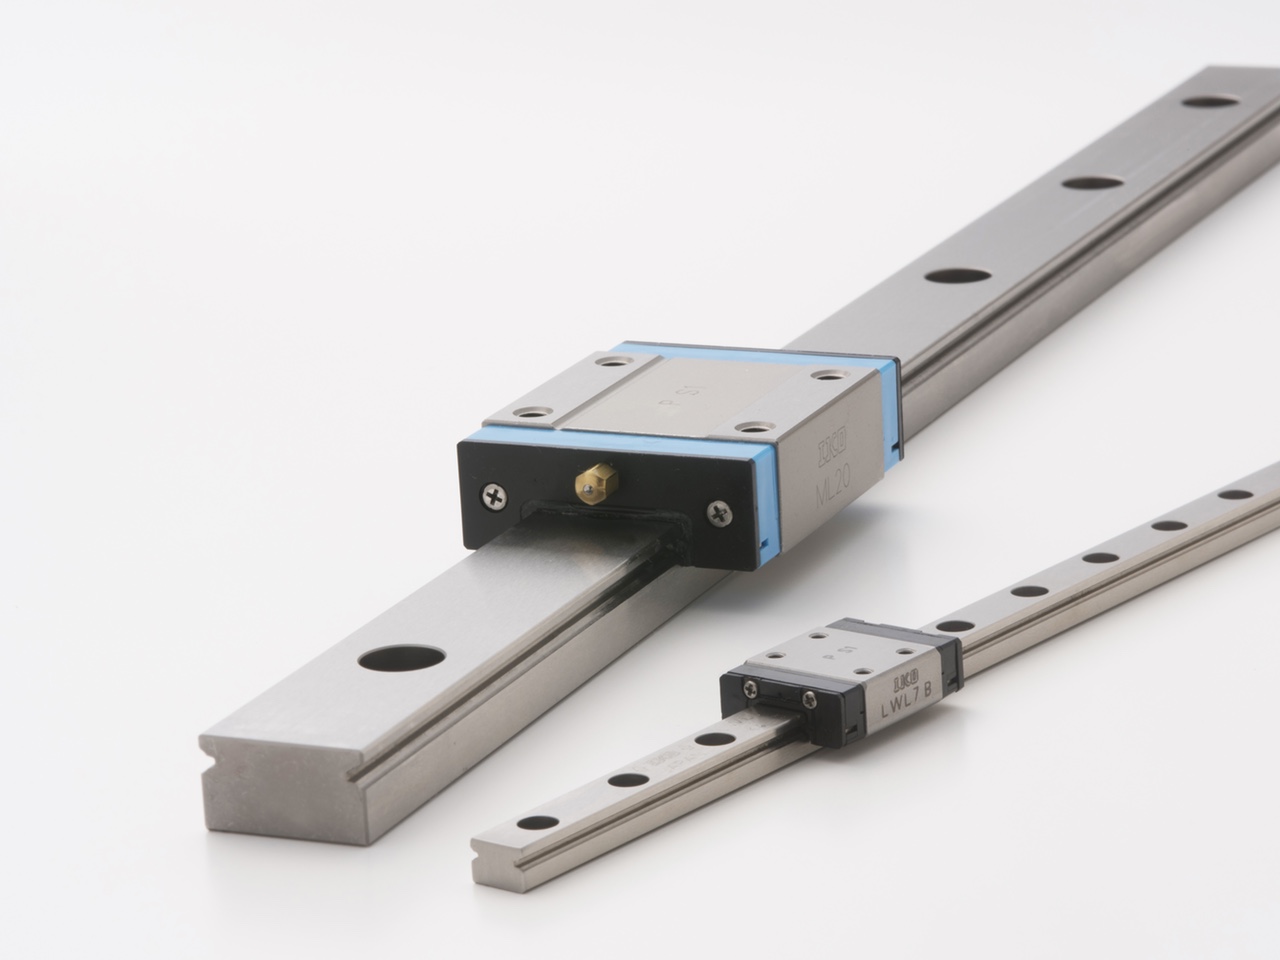 Details about   IKO # LWF60C1R640P   1 LINEAR RAIL &  1 BLOCK  640mm TRAVEL   NEW! 